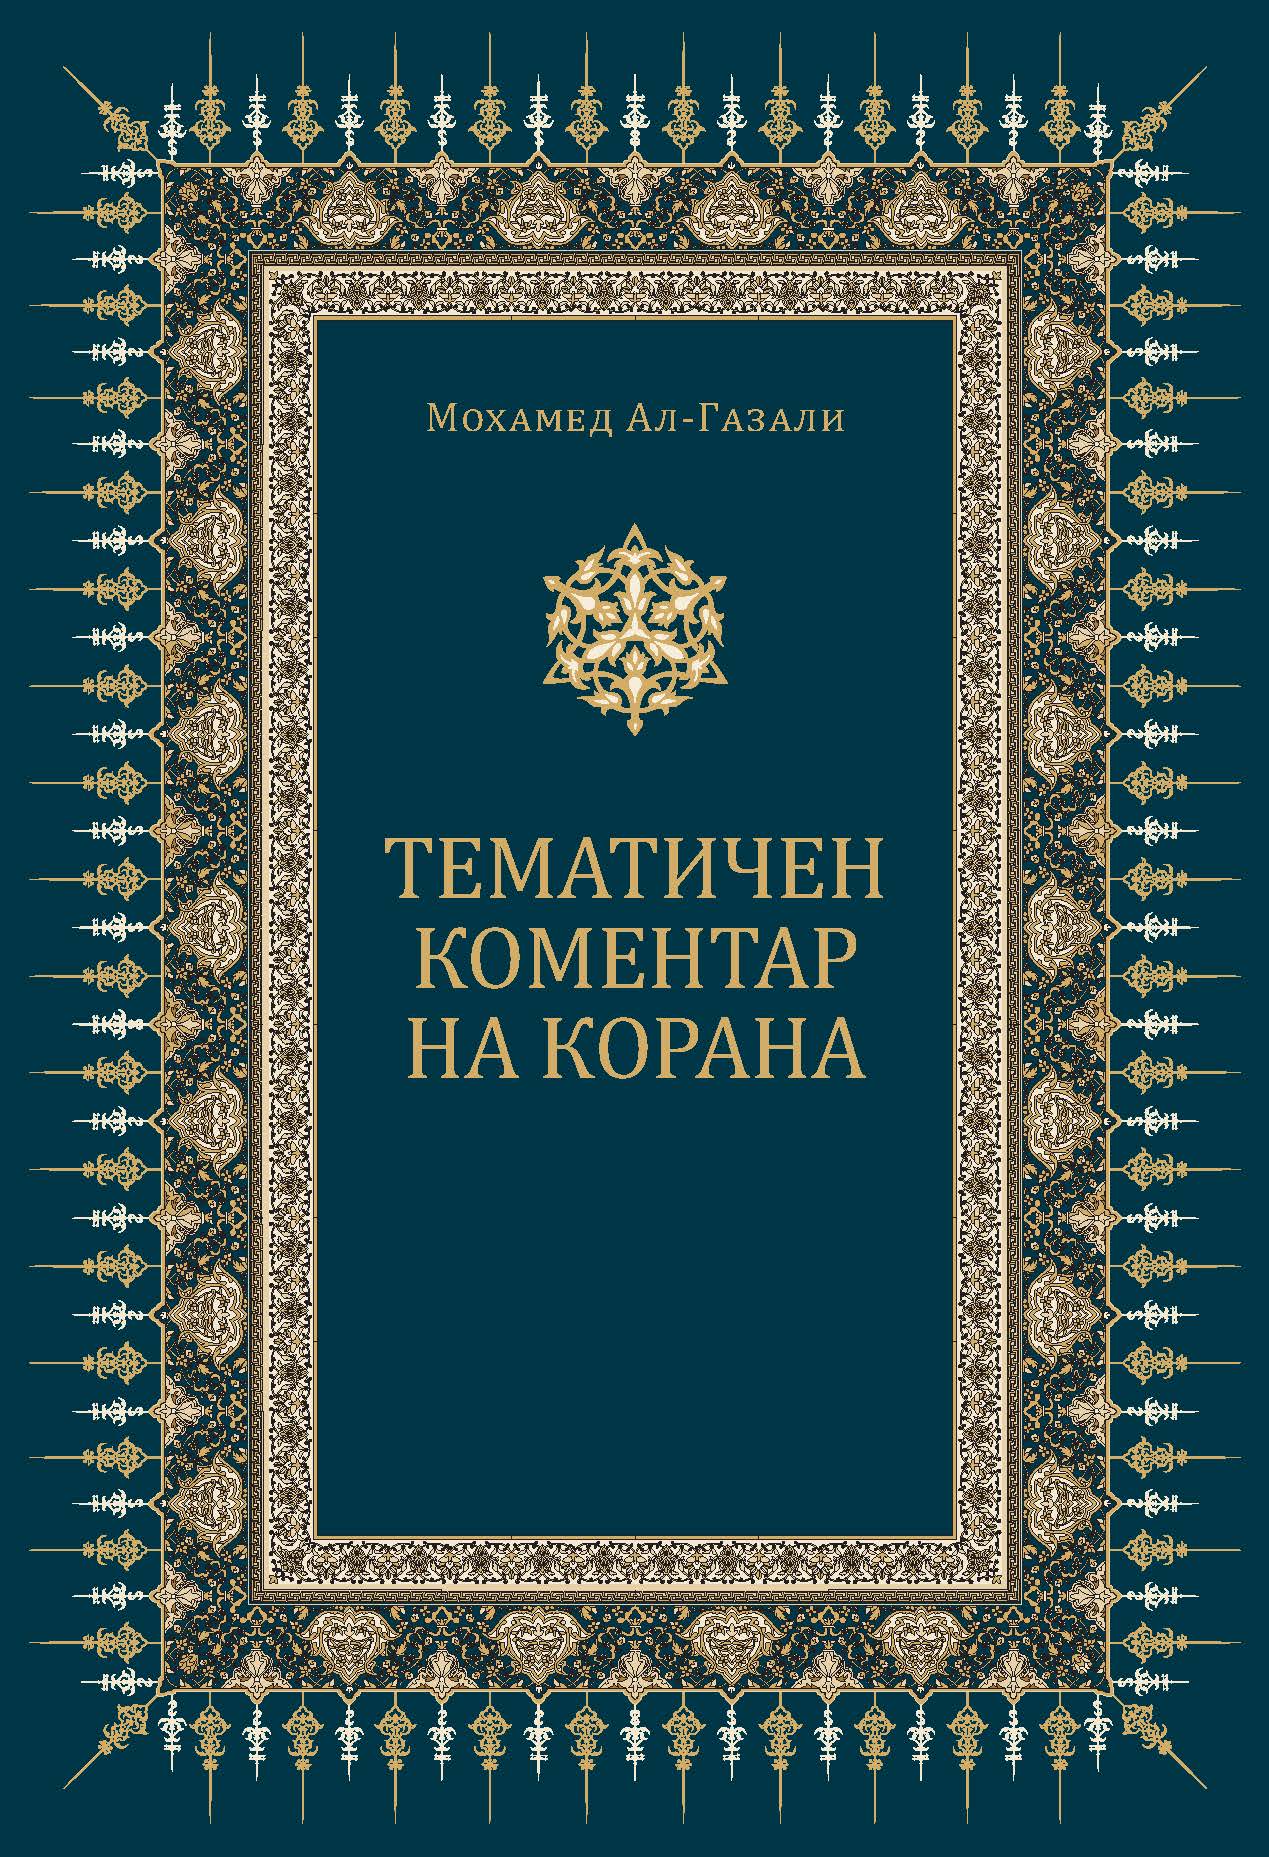 Bulgarian: Тематичен коментар на Корана (A Thematic Commentary on the Quran)